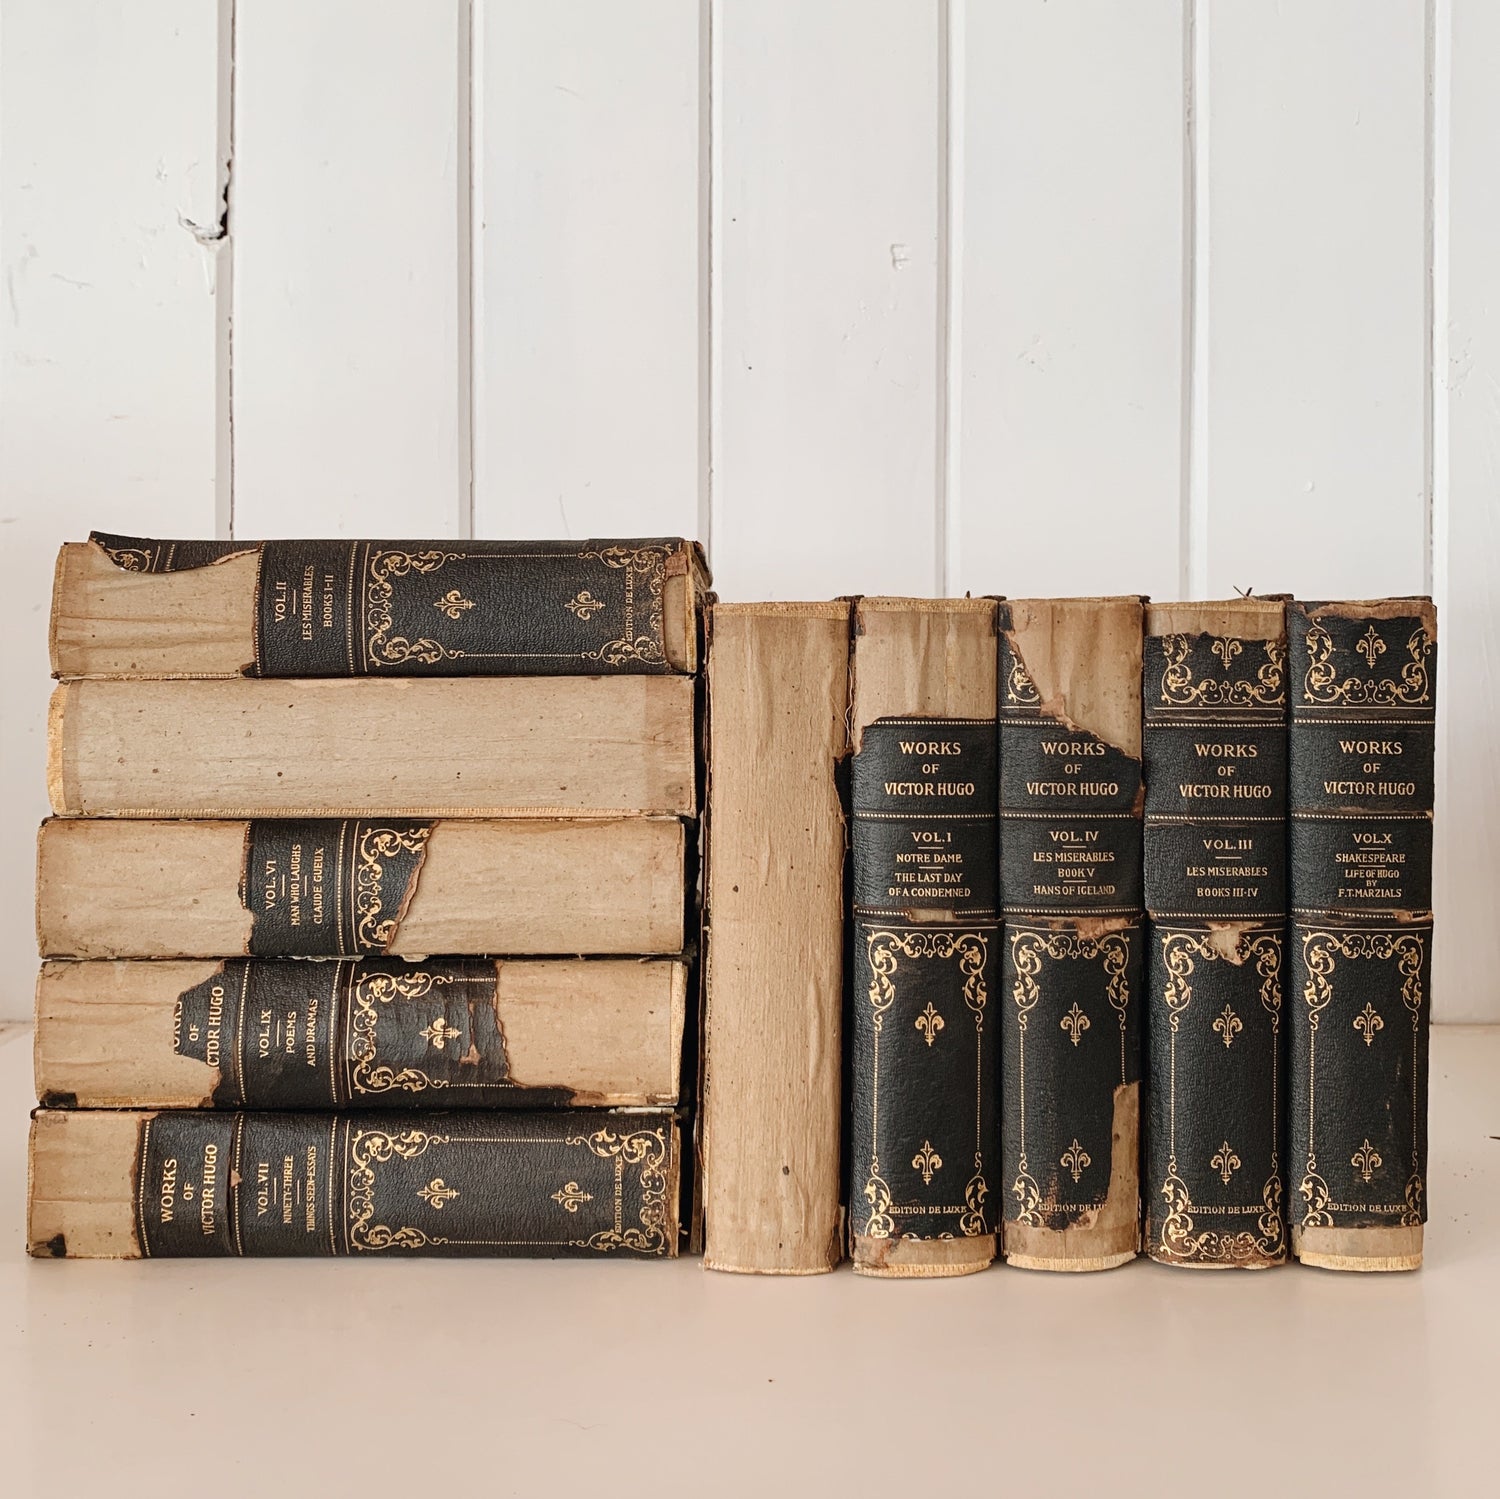 The Works of Victor Hugo, The Chesterfield Society, Edition D Luxe, Black and Beige Shabby Distressed Book Set, French Country